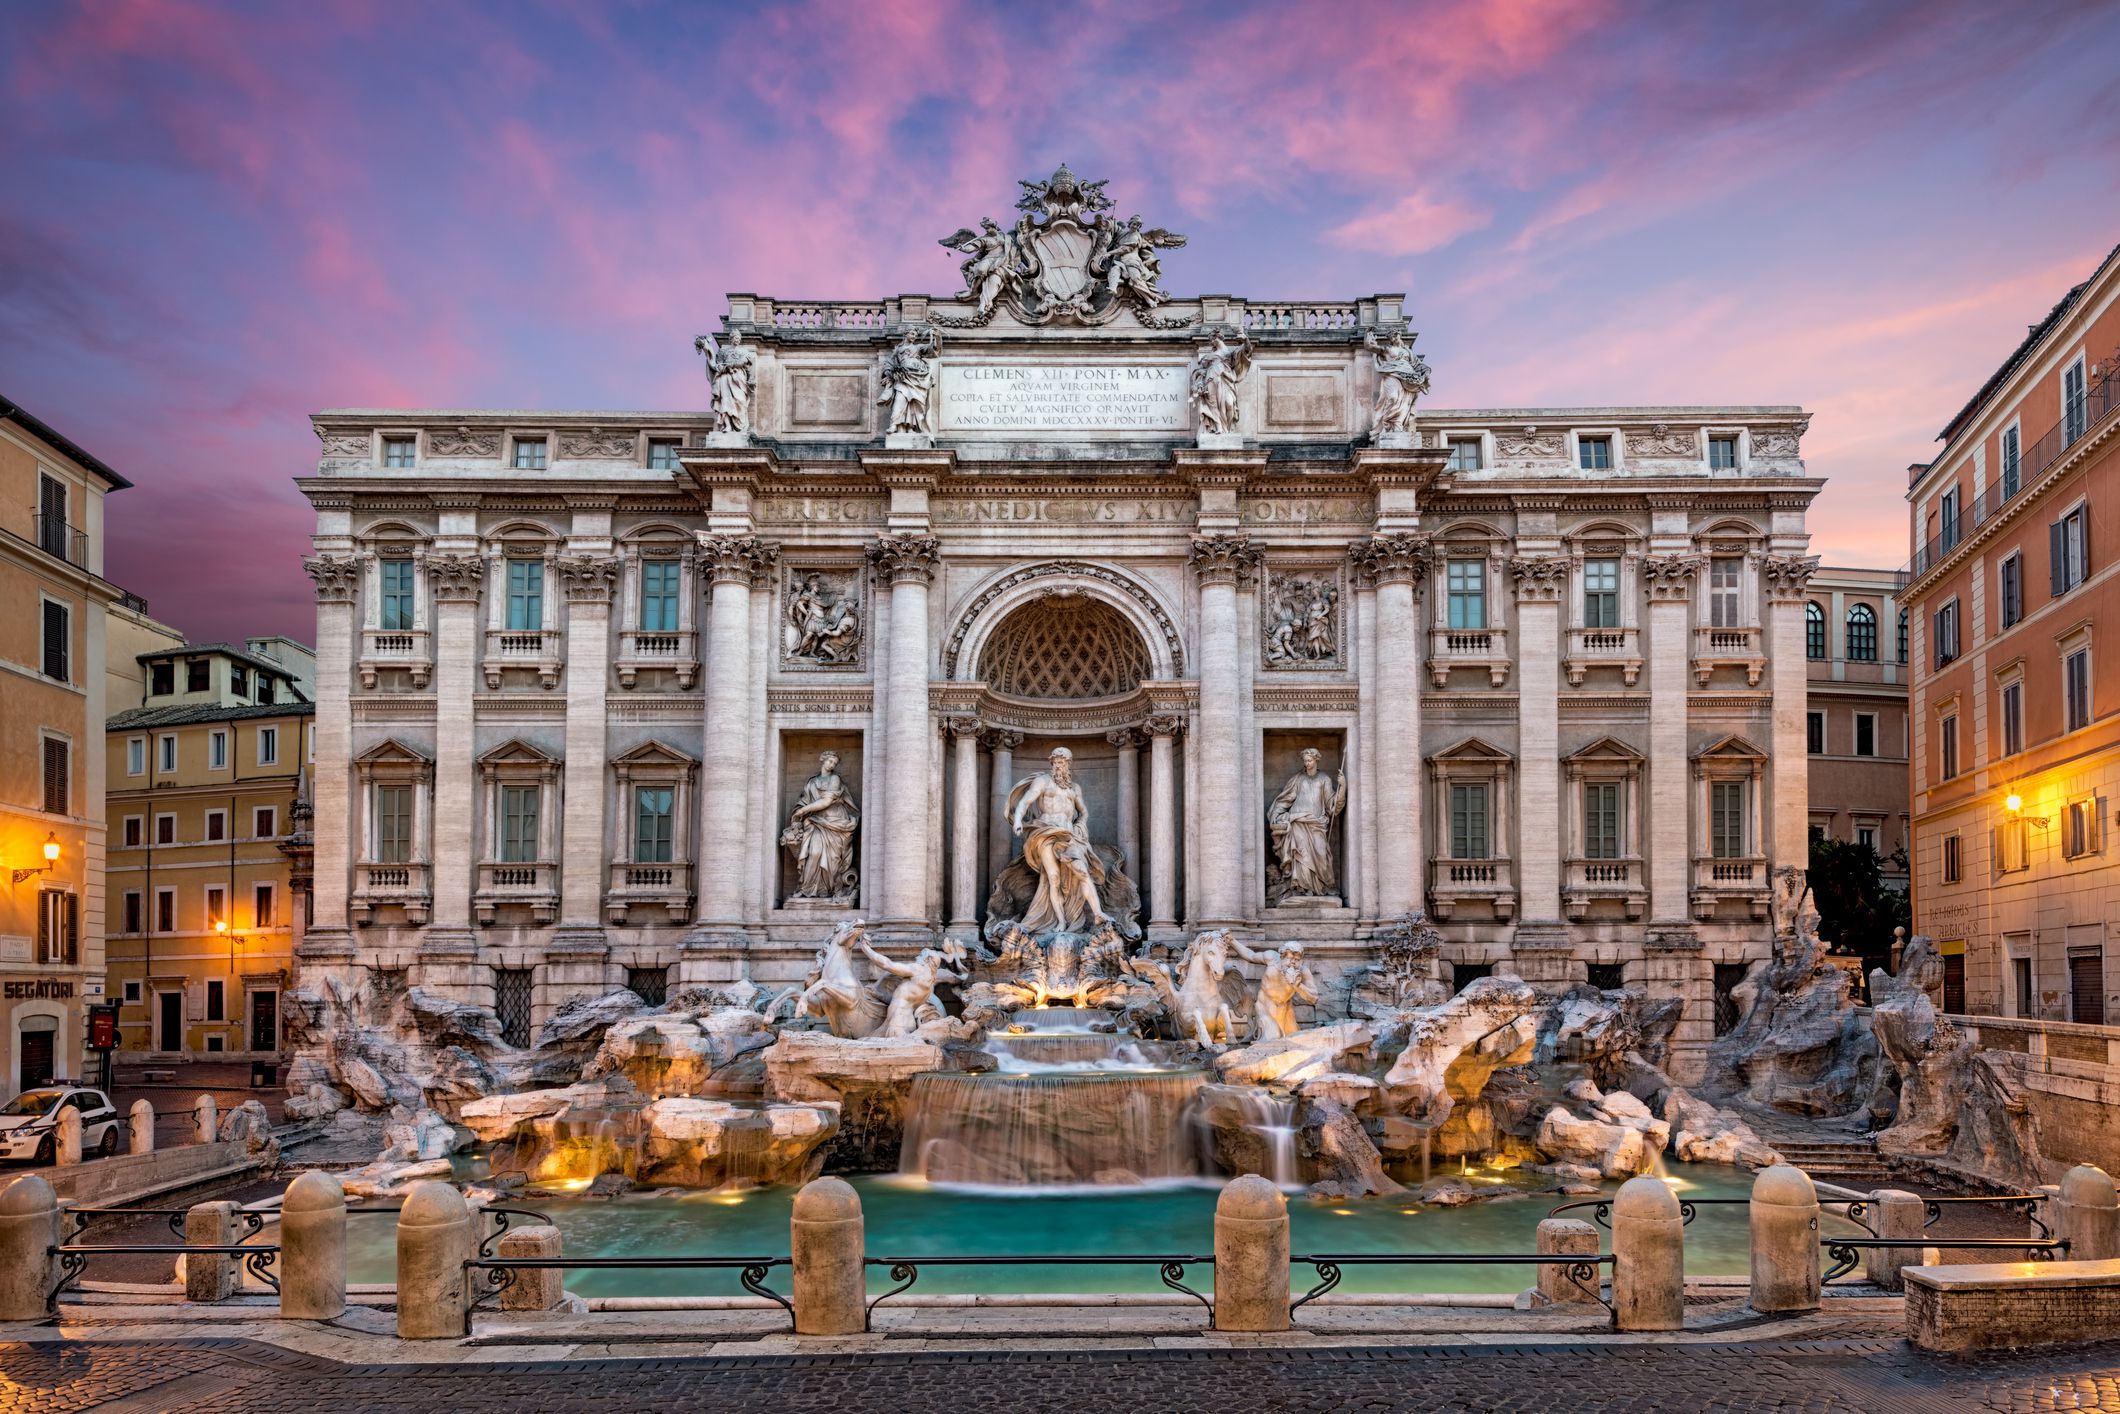 Visiting the Trevi Fountain in Rome, Italy